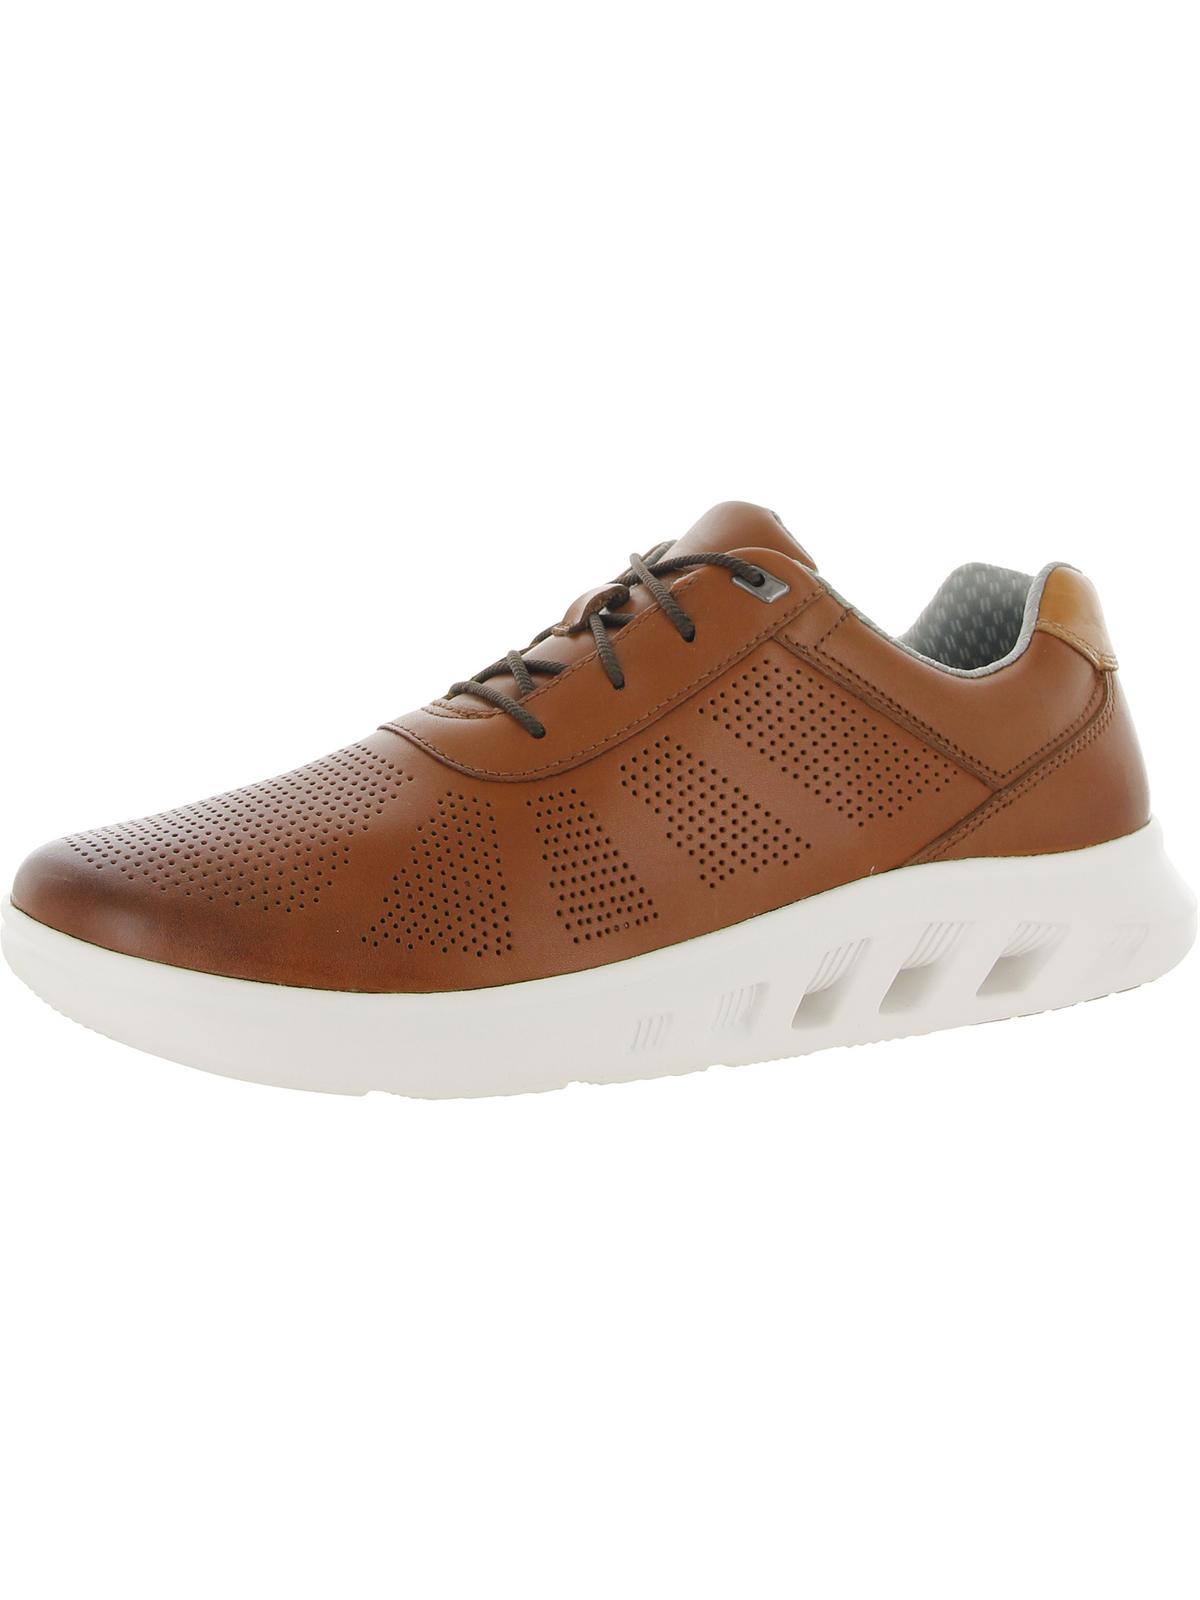 JOHNSTON & MURPHY ACTIVATE MENS LEATHER FITNESS ATHLETIC AND TRAINING SHOES